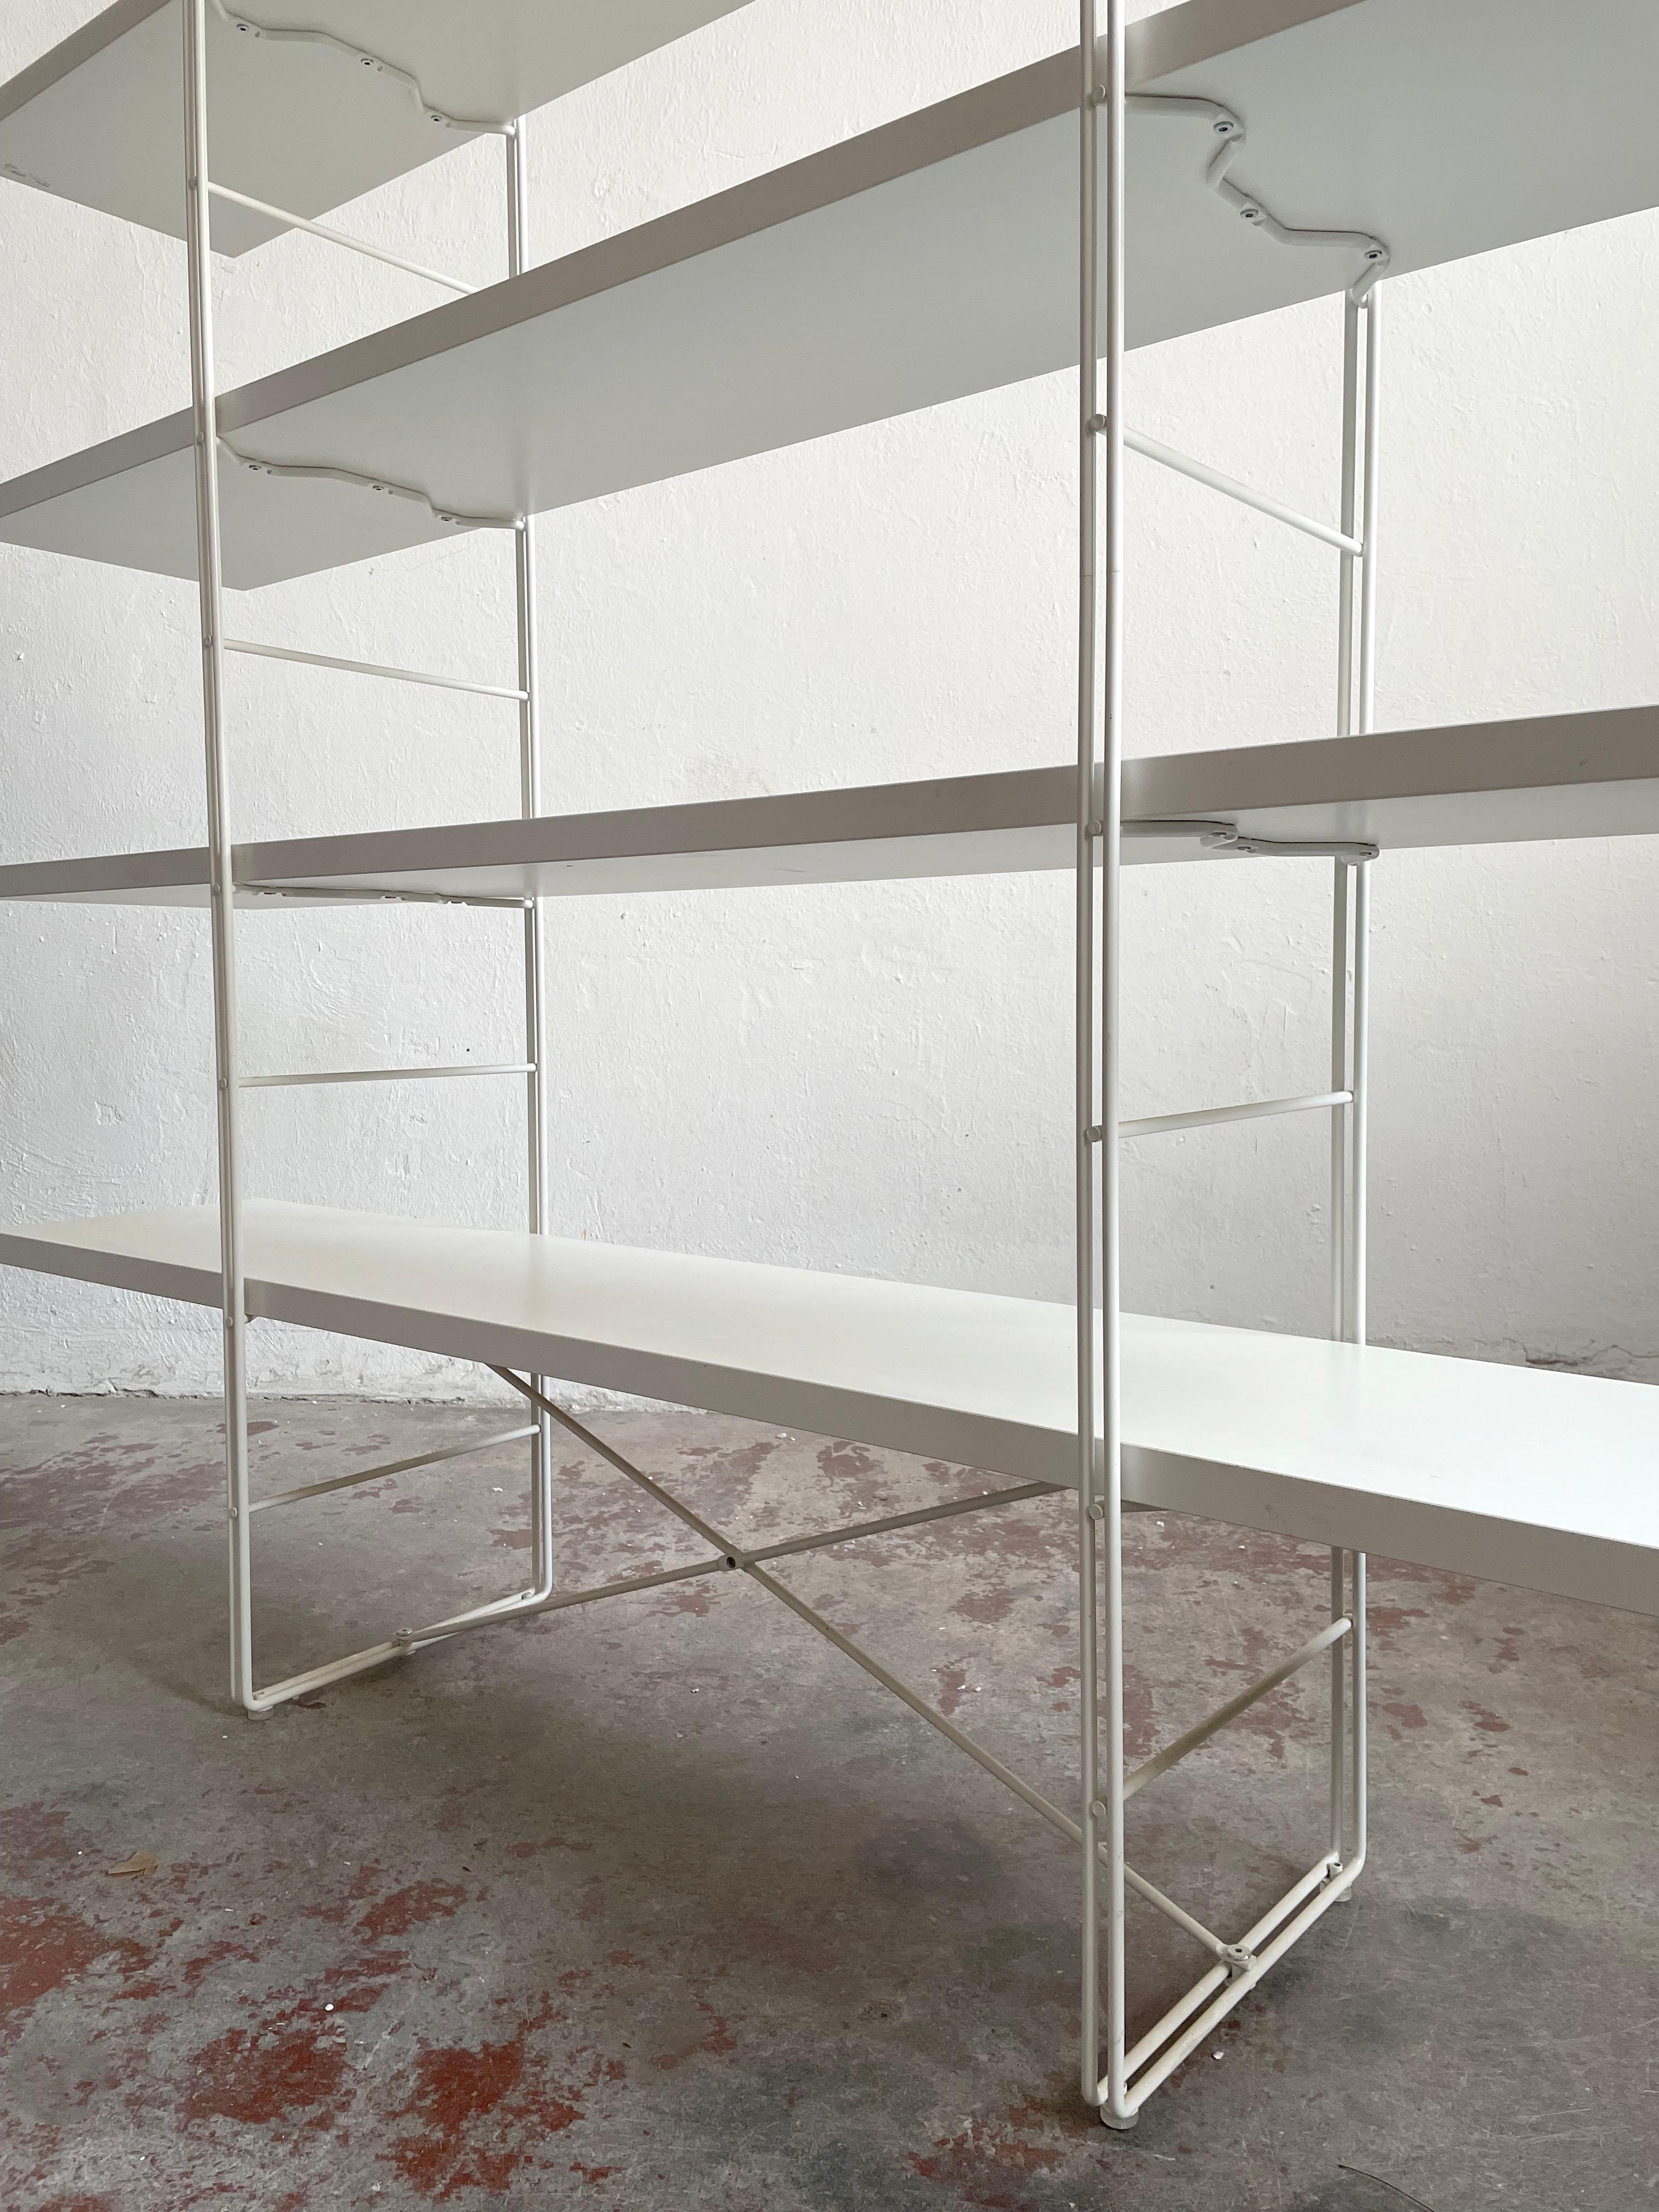 Late 20th Century “Guide” Shelving Unit by Niels Gammelgaard for IKEA, Sweden, 1985